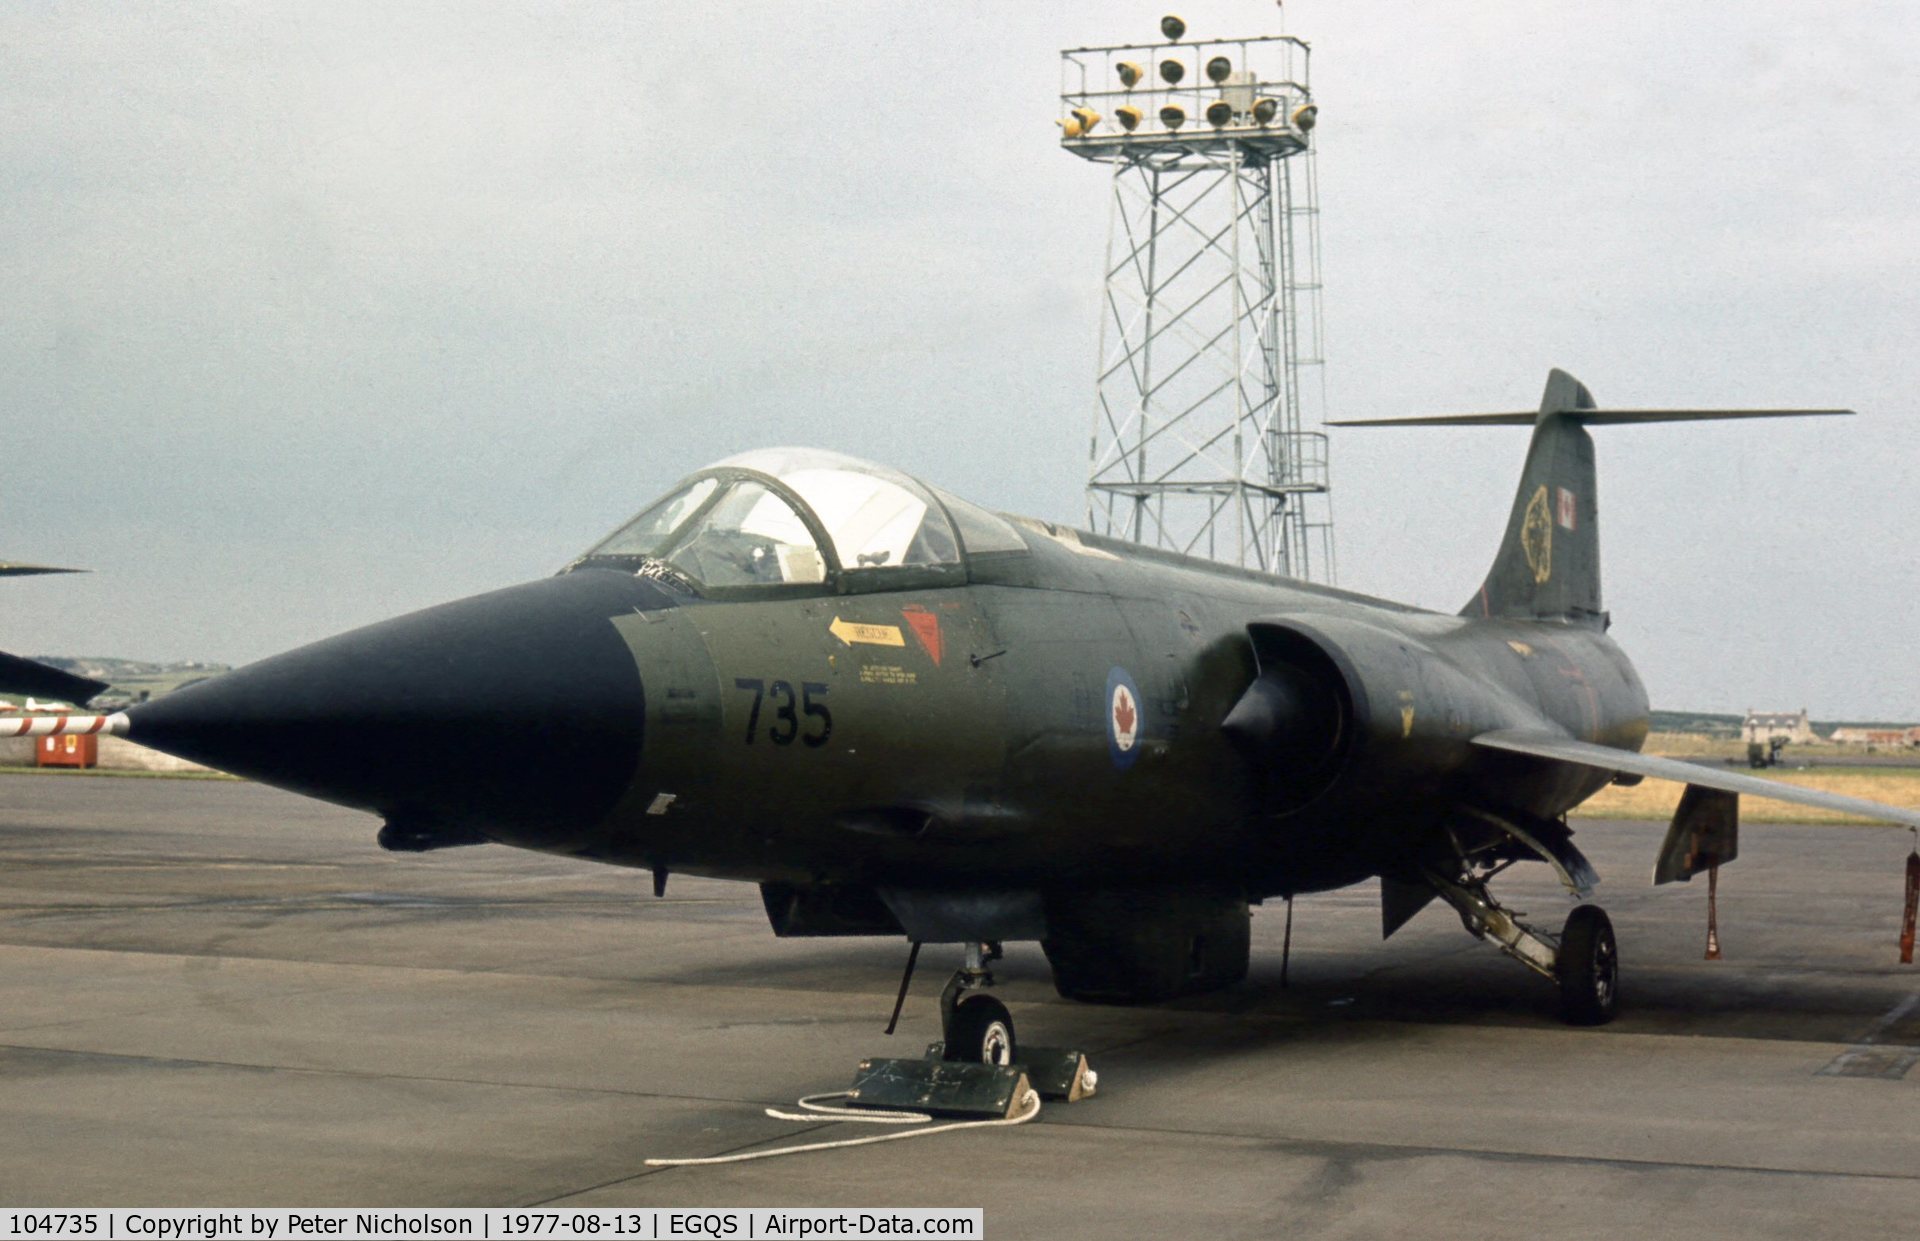 104735, Canadair CF-104 Starfighter C/N 683A-1035, Another view of 439 Squadron's CF-104 Starfighter at the 1977 RAF Lossiemouth Open Day.